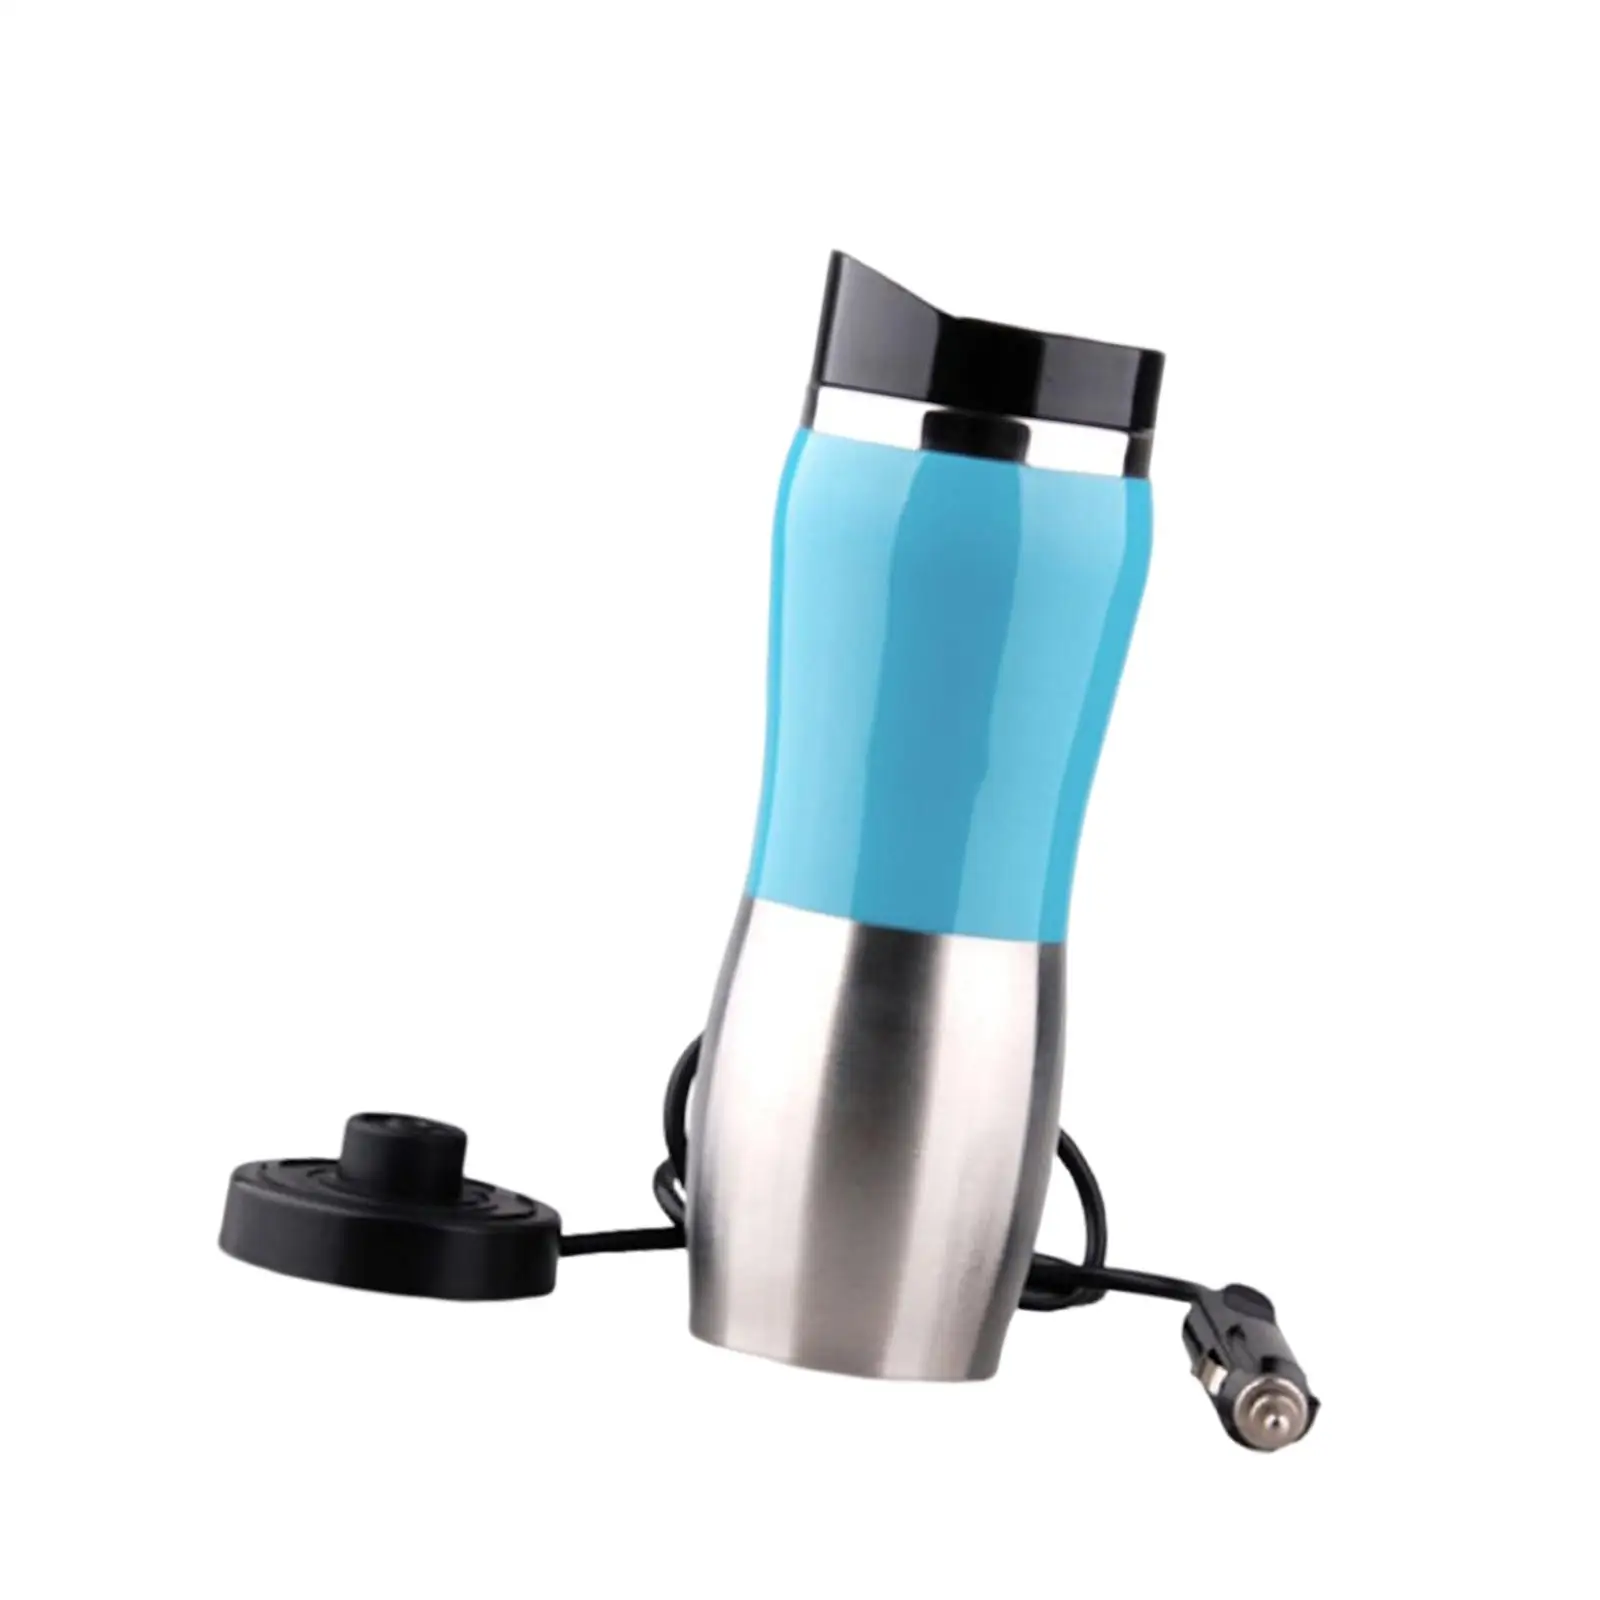 Car Electric Kettle 24V 400ml in Car Stainless Steel Travel Heating Cup Car Water Heater Mug for Tea Camping Boat Hot Water Eggs